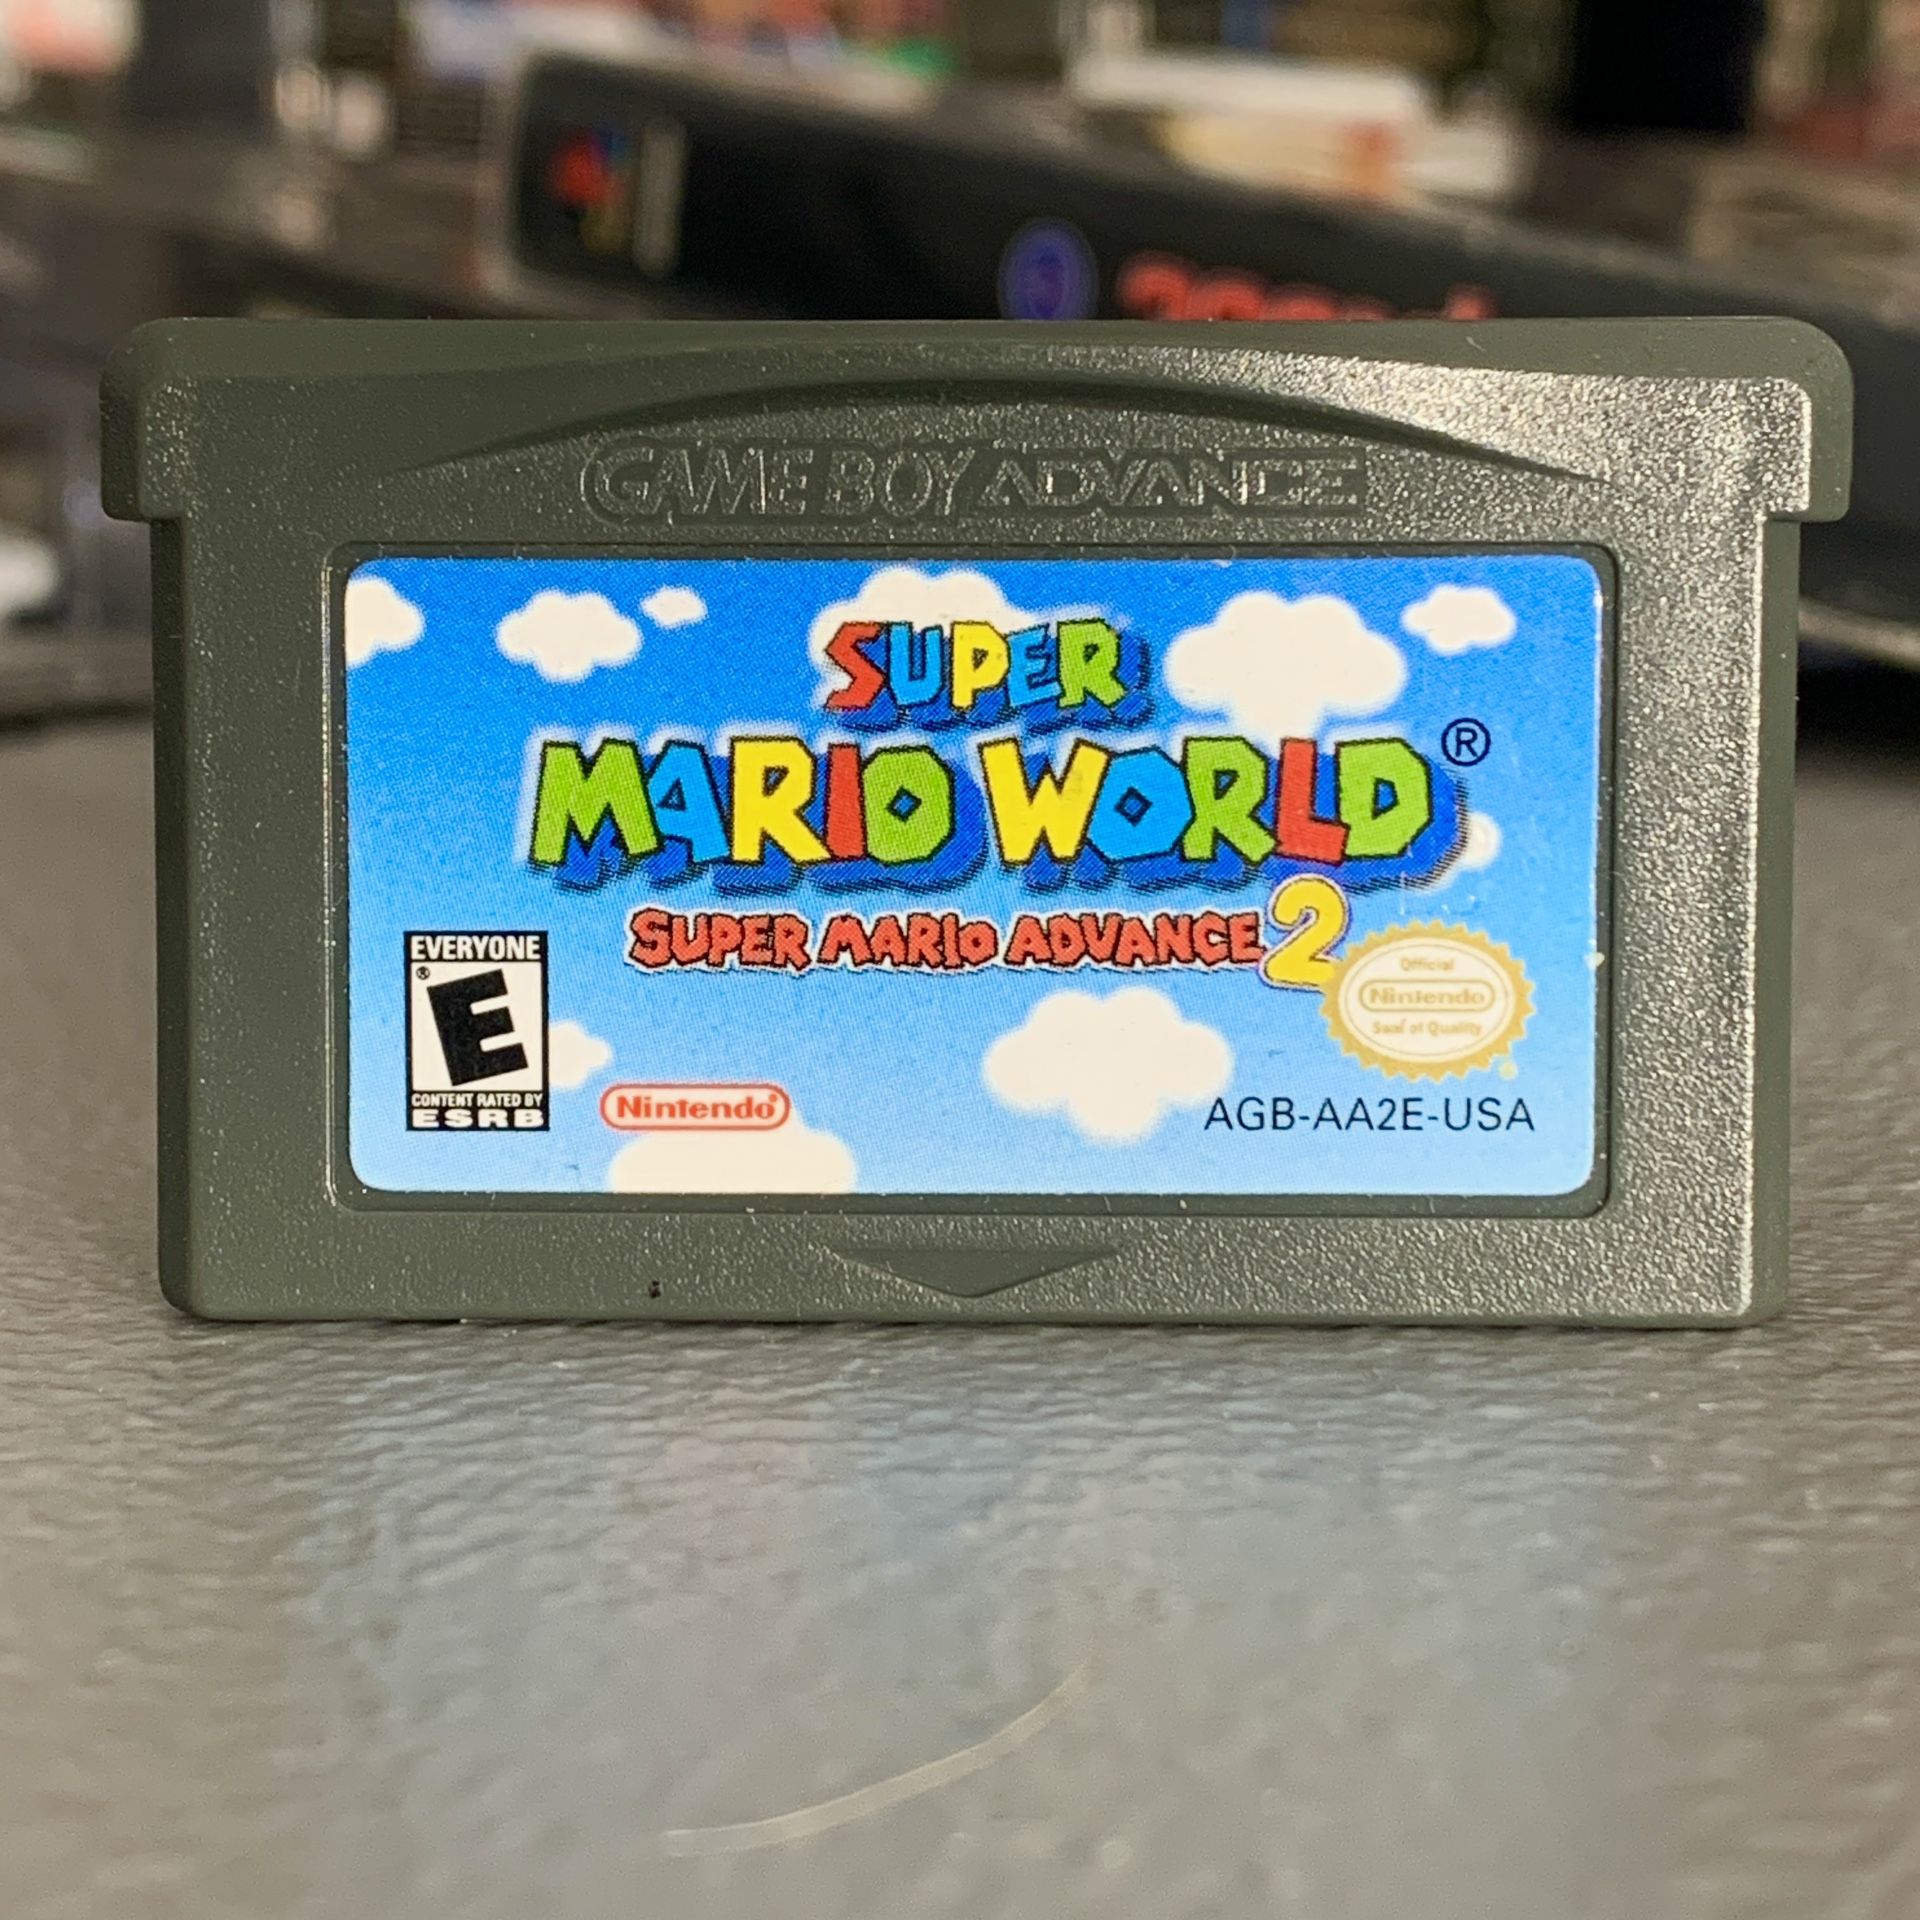 Super Mario World Super Mario Advance 2 (Game Boy Advance, 2002)  *TRADE IN YOUR OLD GAMES FOR CSH OR CREDIT HERE/WE FIX SYSTEMS*